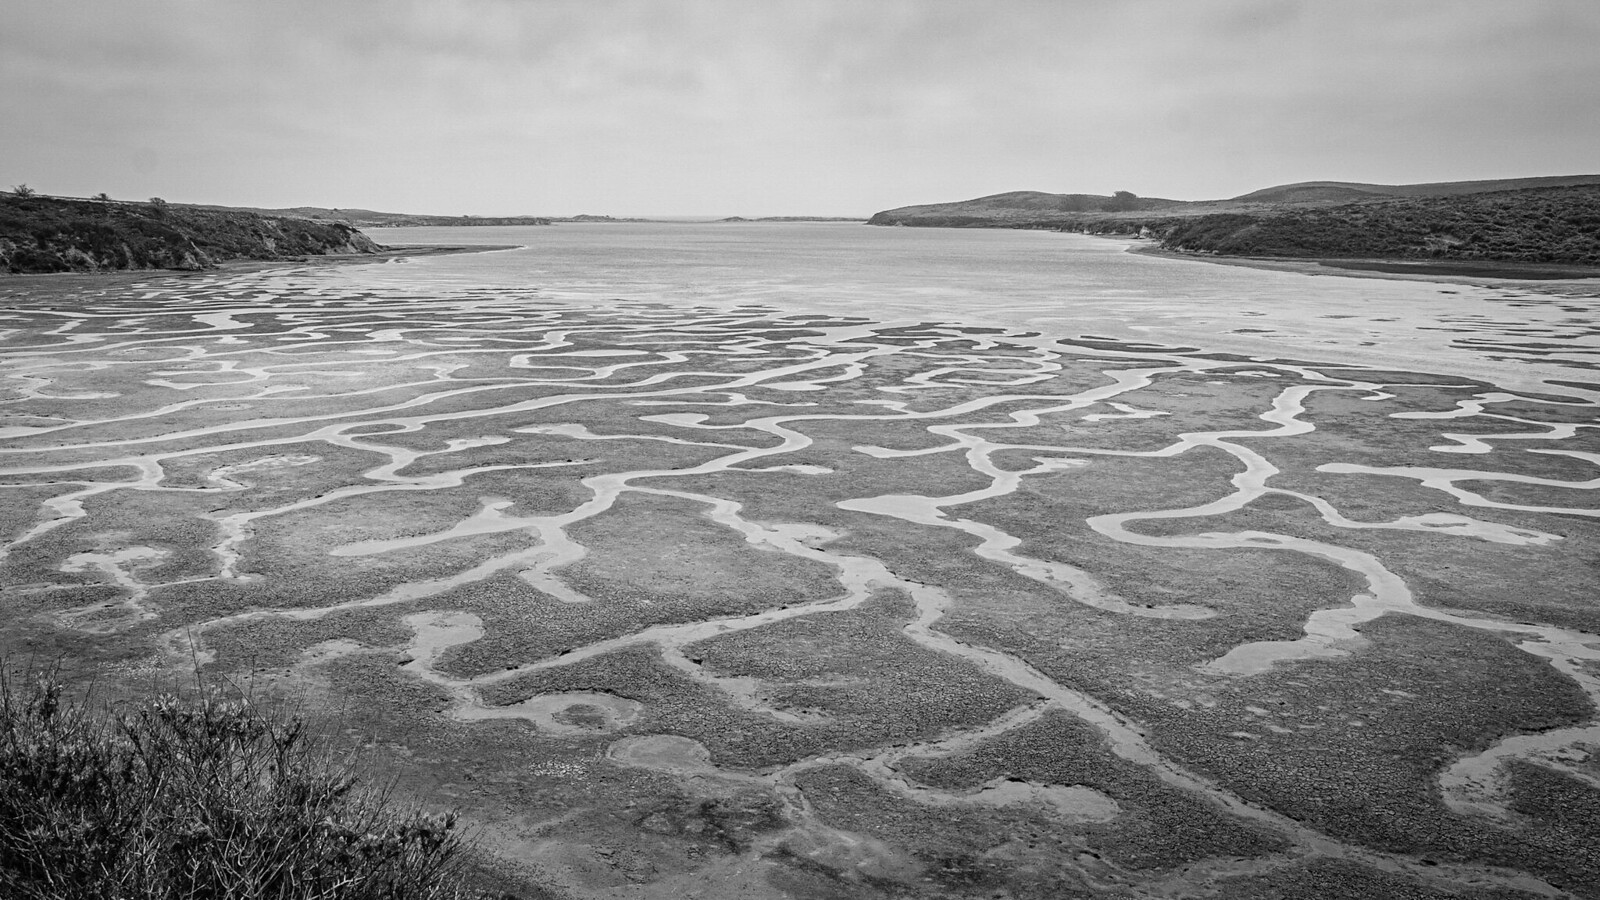 Mudflat Squiggles (IV) at Low Tide, last May with Ward